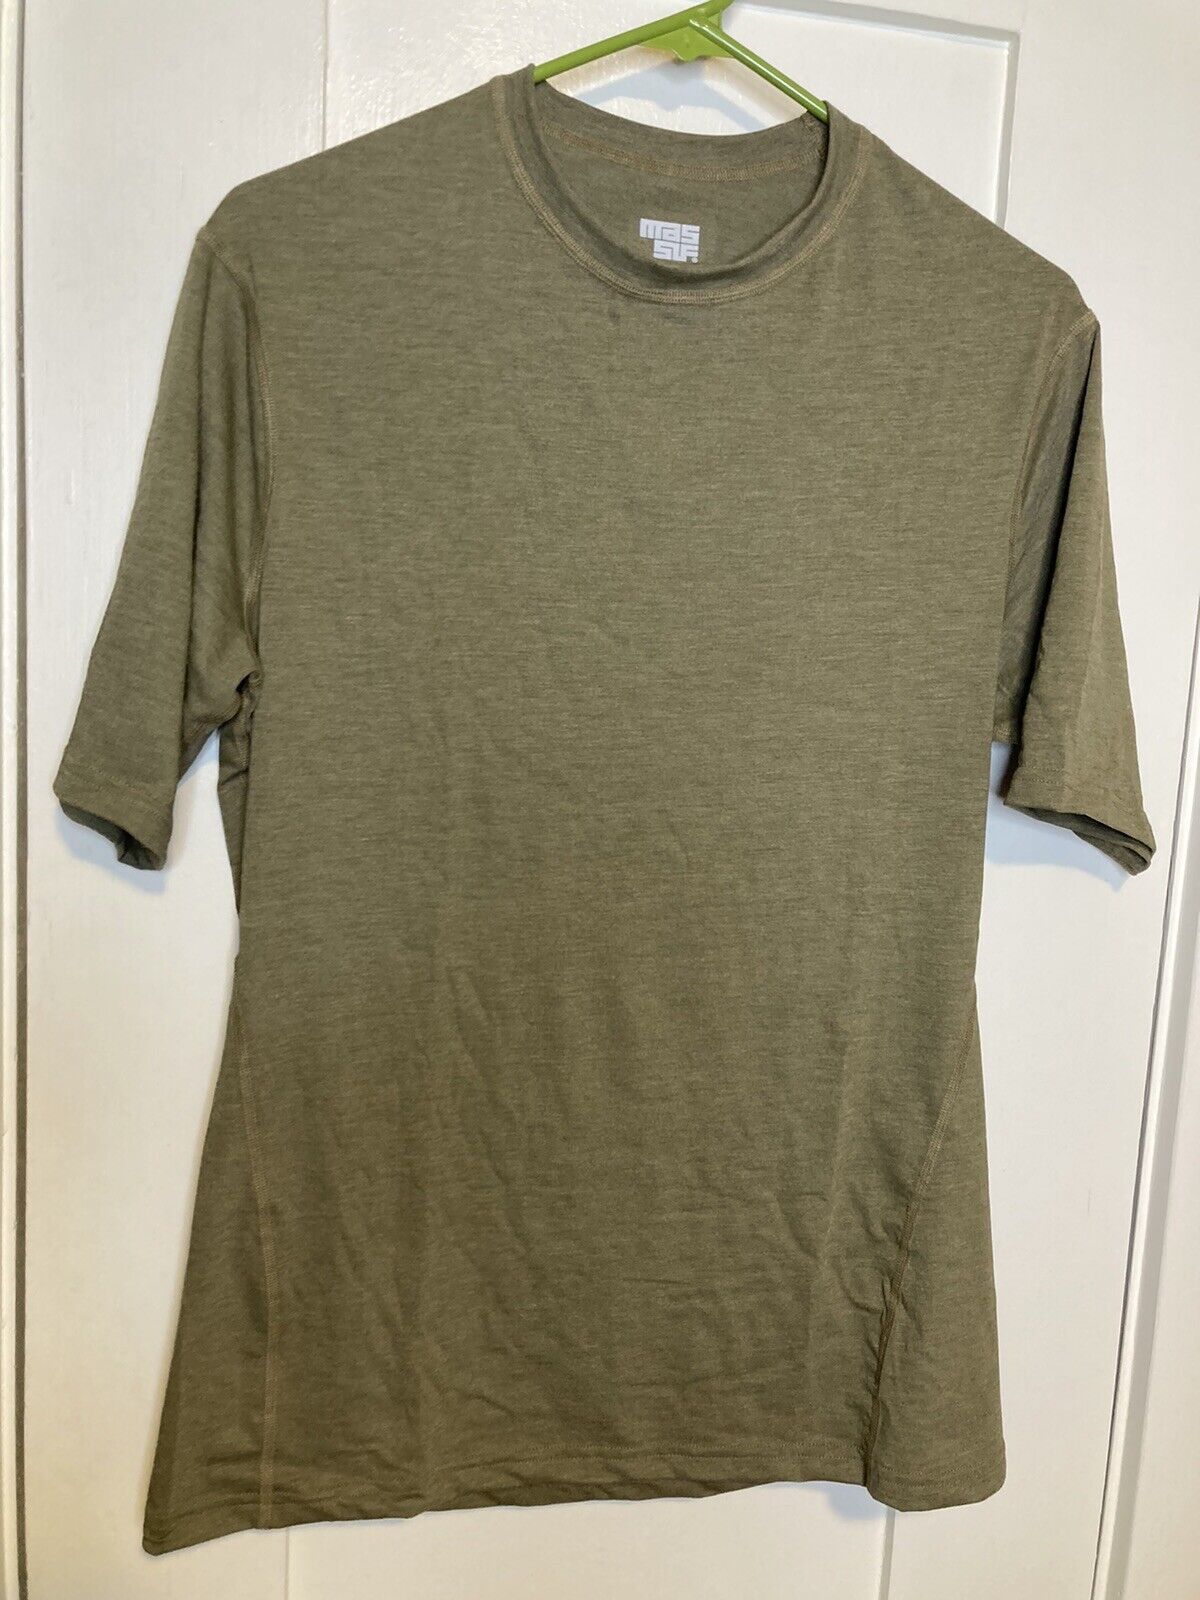 NWOT Massif Inversion Lightweight Flame Resistant T Shirt USA Men’s Small